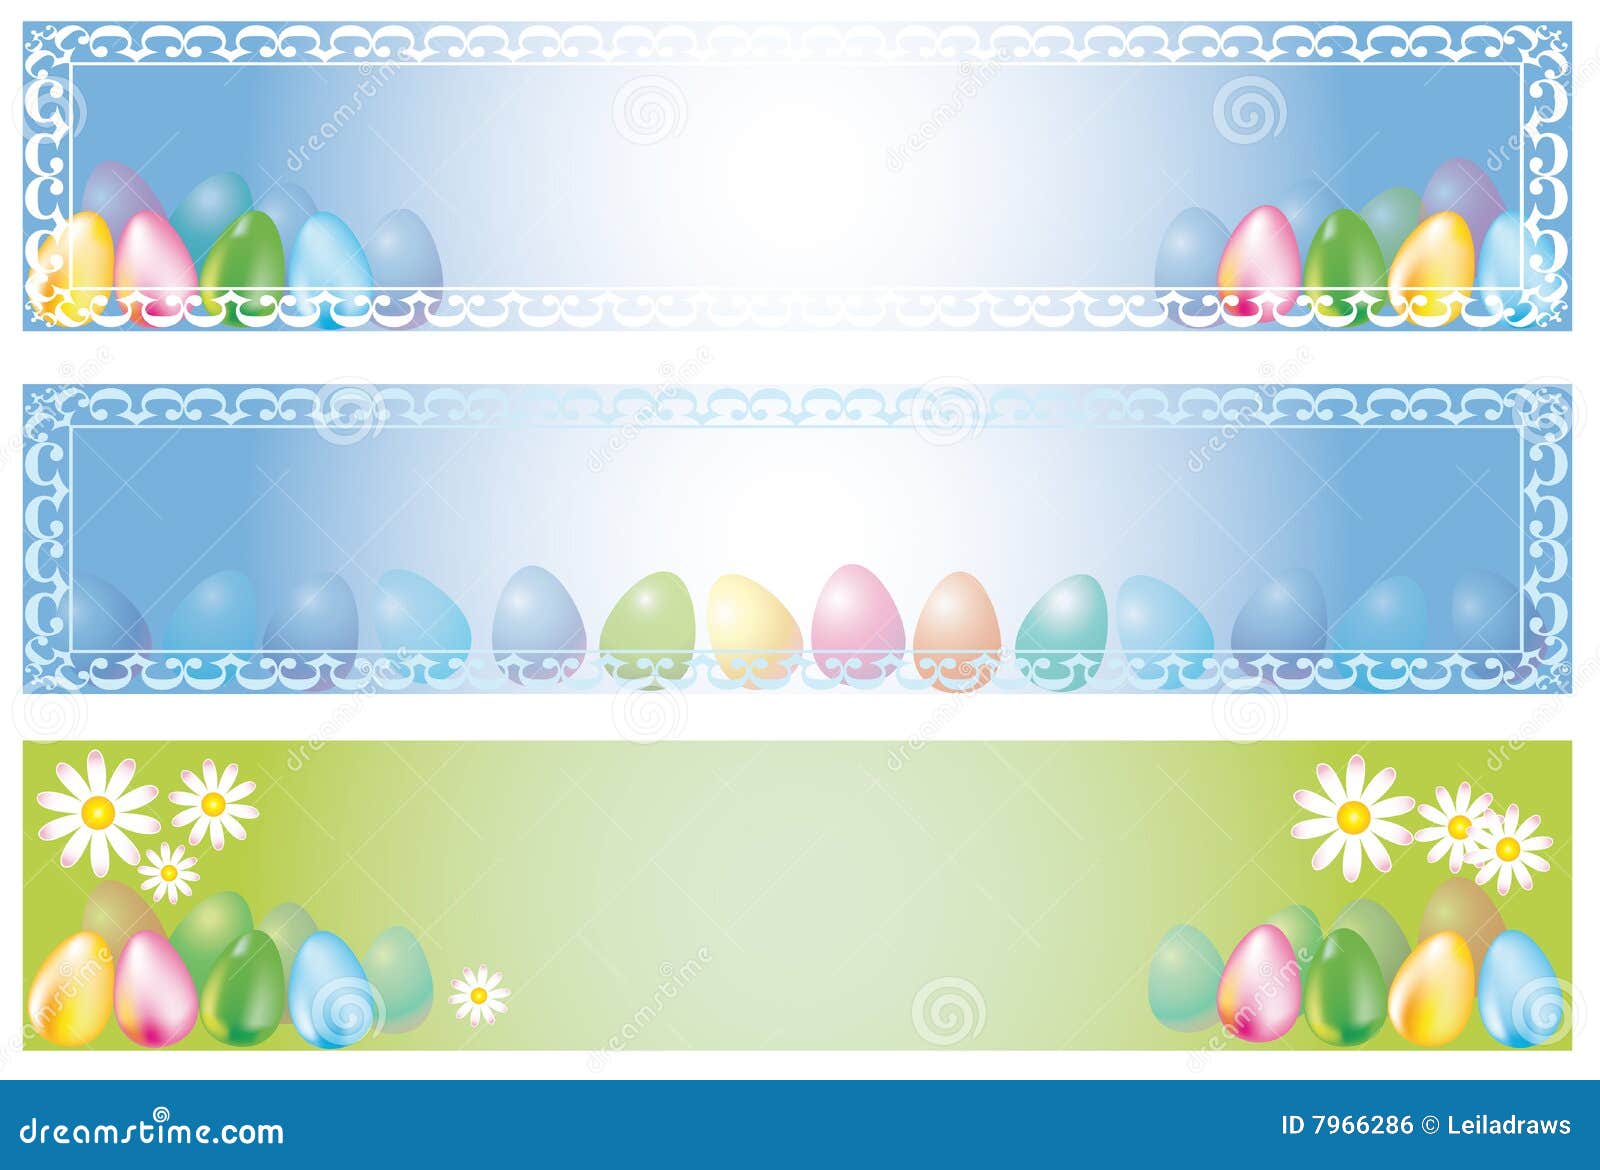 Spring  Easter Banners